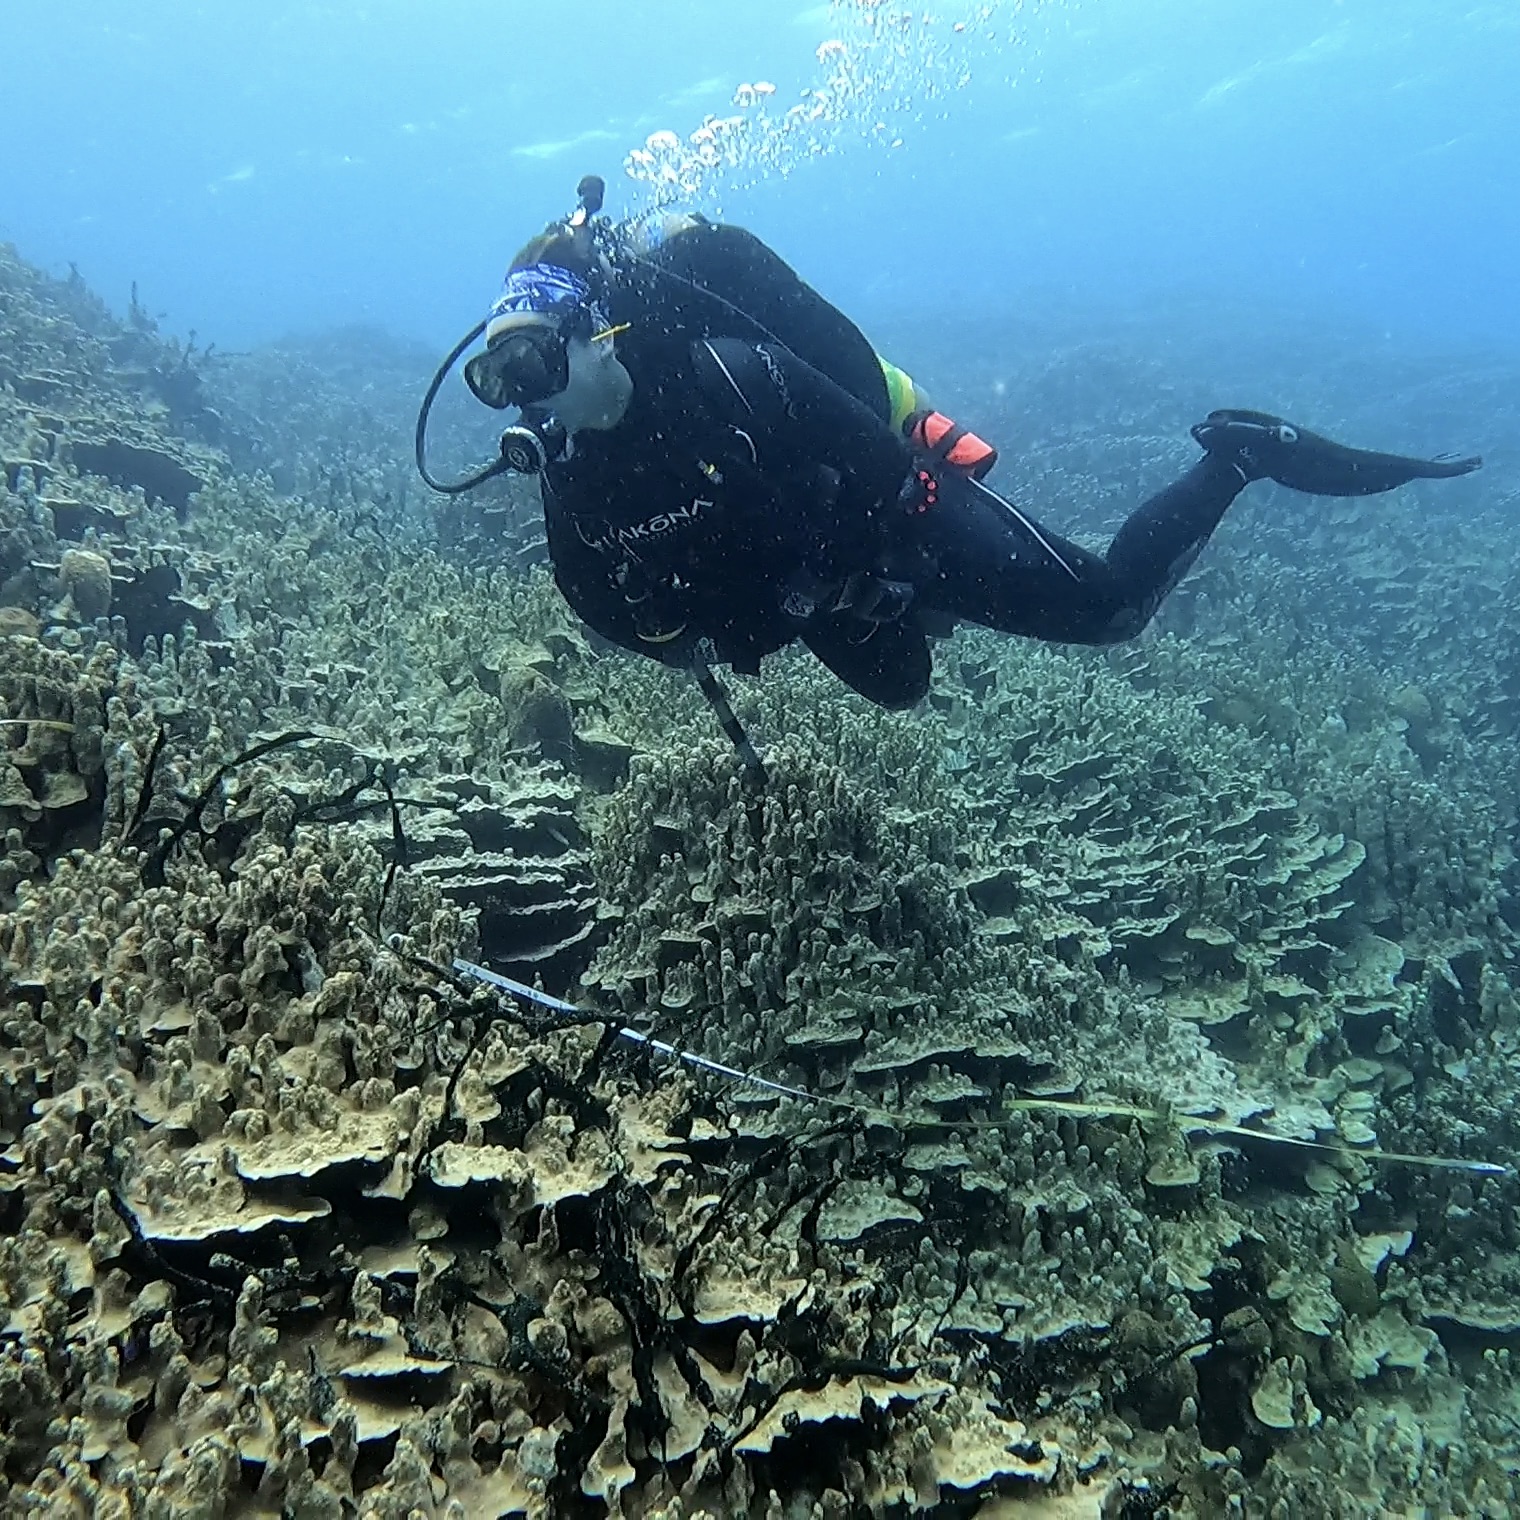 Monitoring coral reefs allows us to see how they change over time.